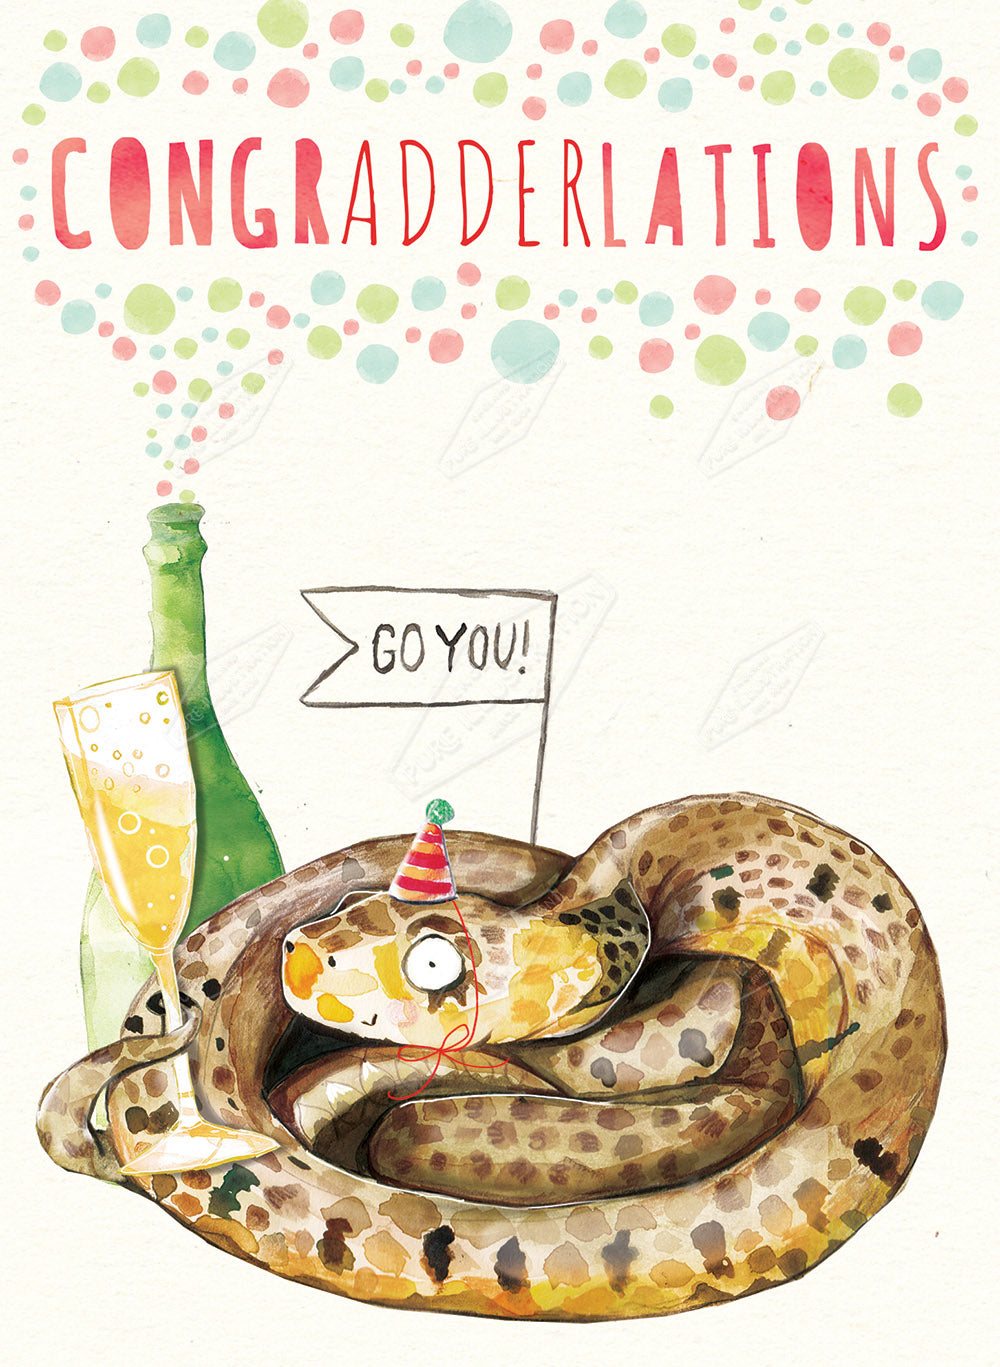 00028553EST- Emily Stalley is represented by Pure Art Licensing Agency - Congratulations Greeting Card Design